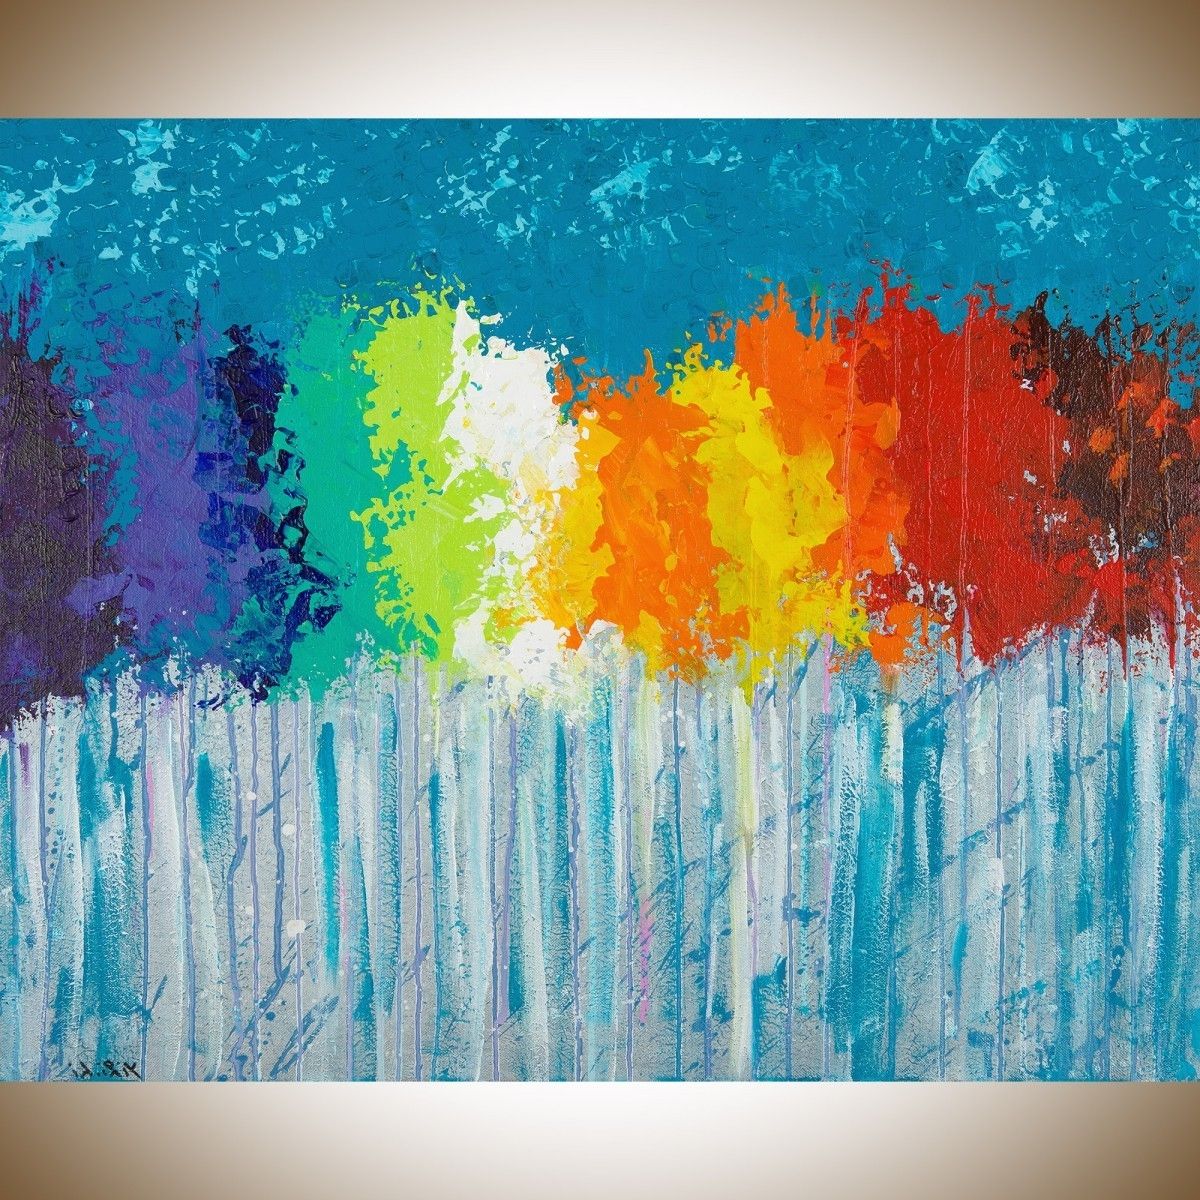 Rainbow Flowersqiqigallery 30"x24" Original Modern Abstract Pertaining To Best And Newest Rainbow Canvas Wall Art (View 1 of 15)